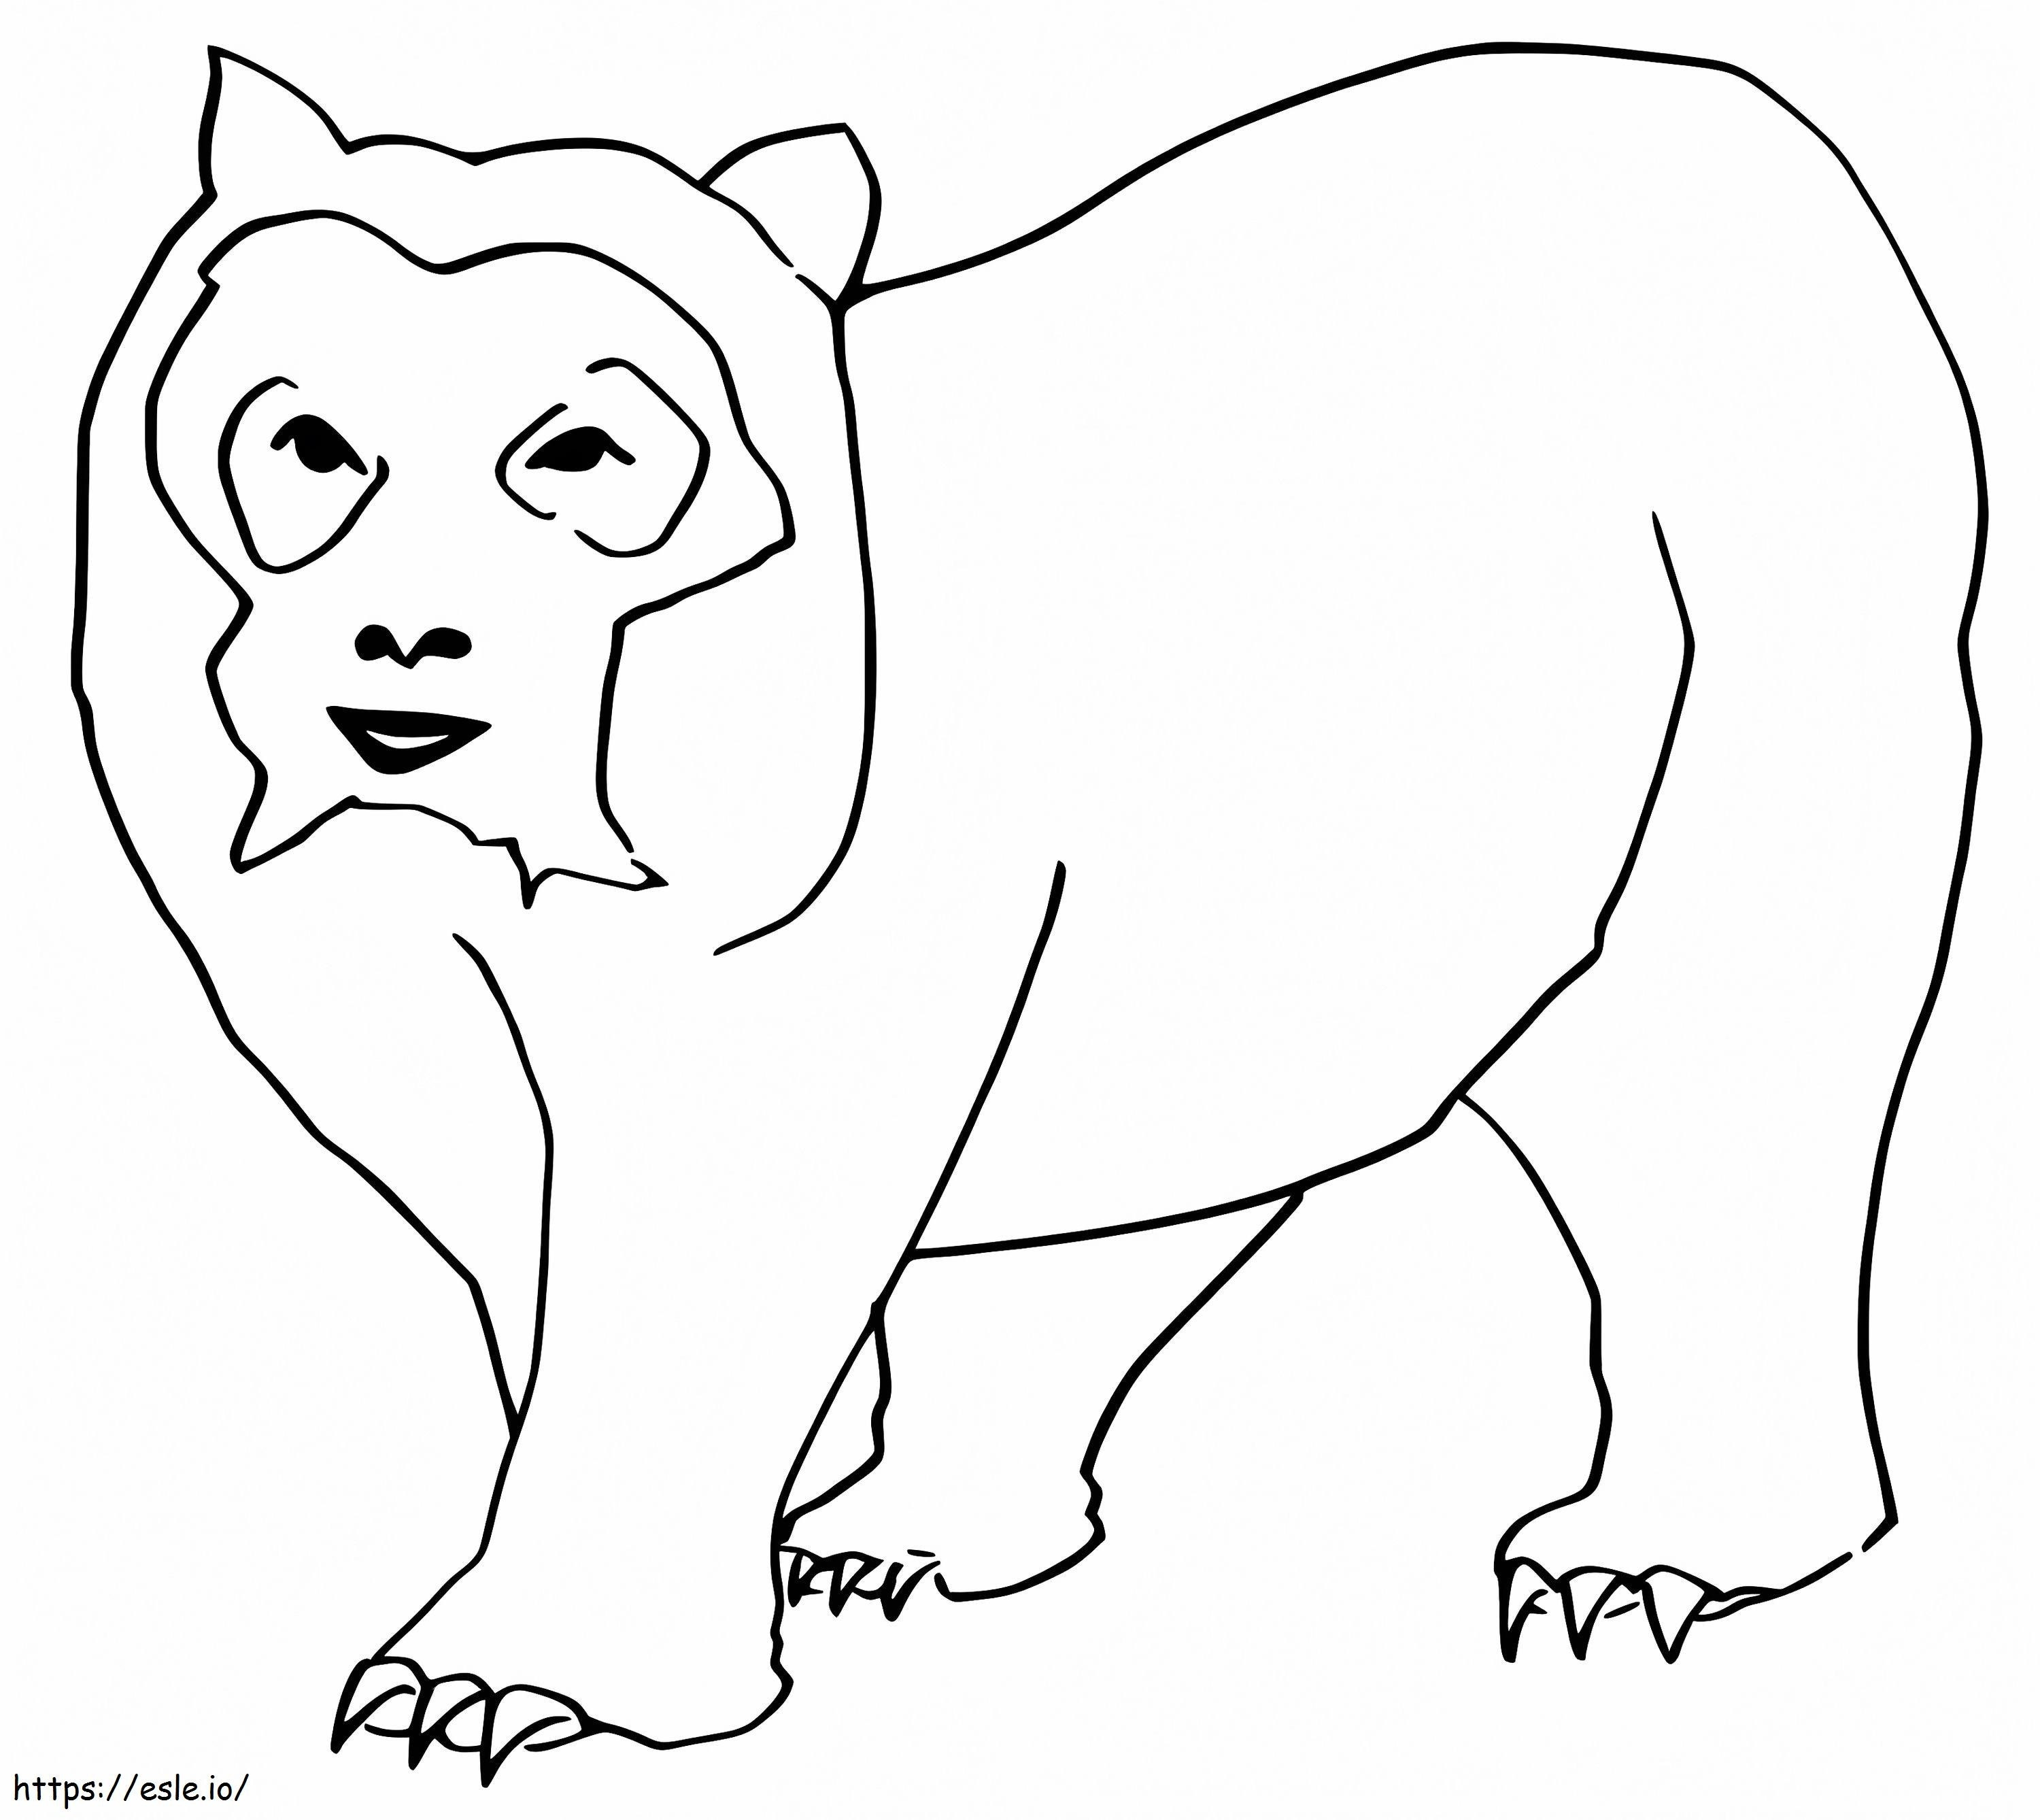 Printable Spectacled Bear coloring page